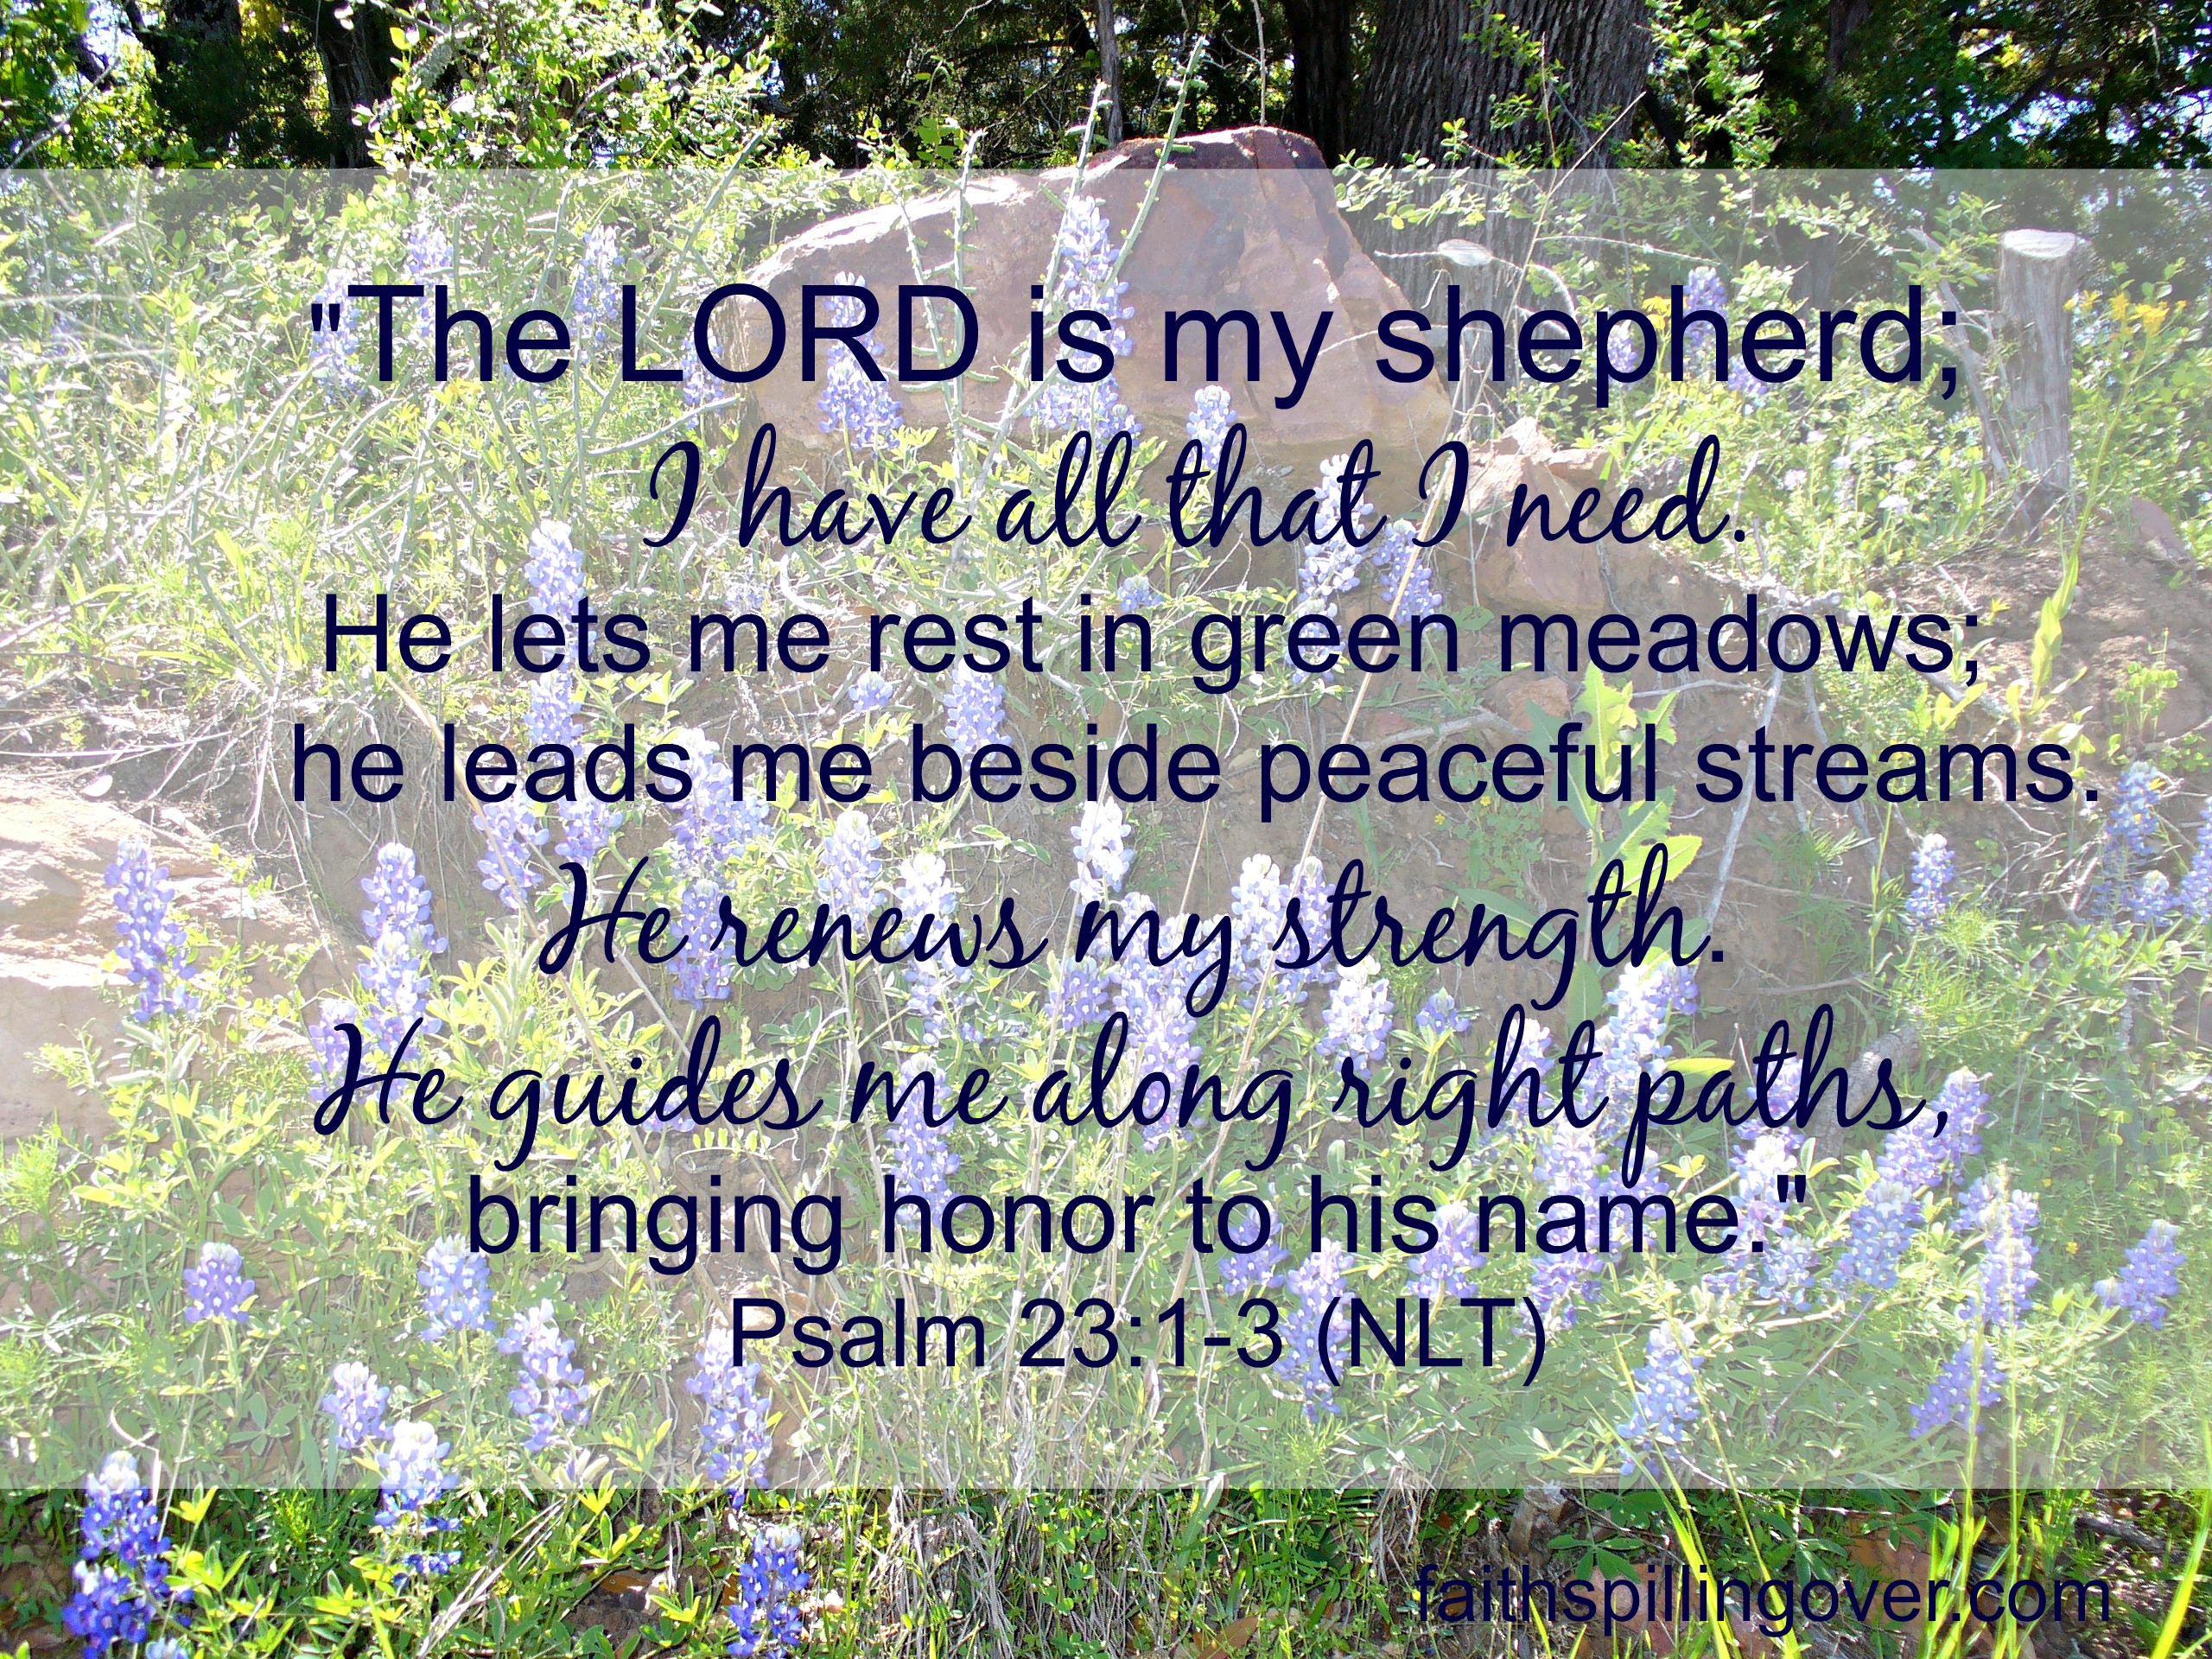 The Lord is My Shepherd whole text